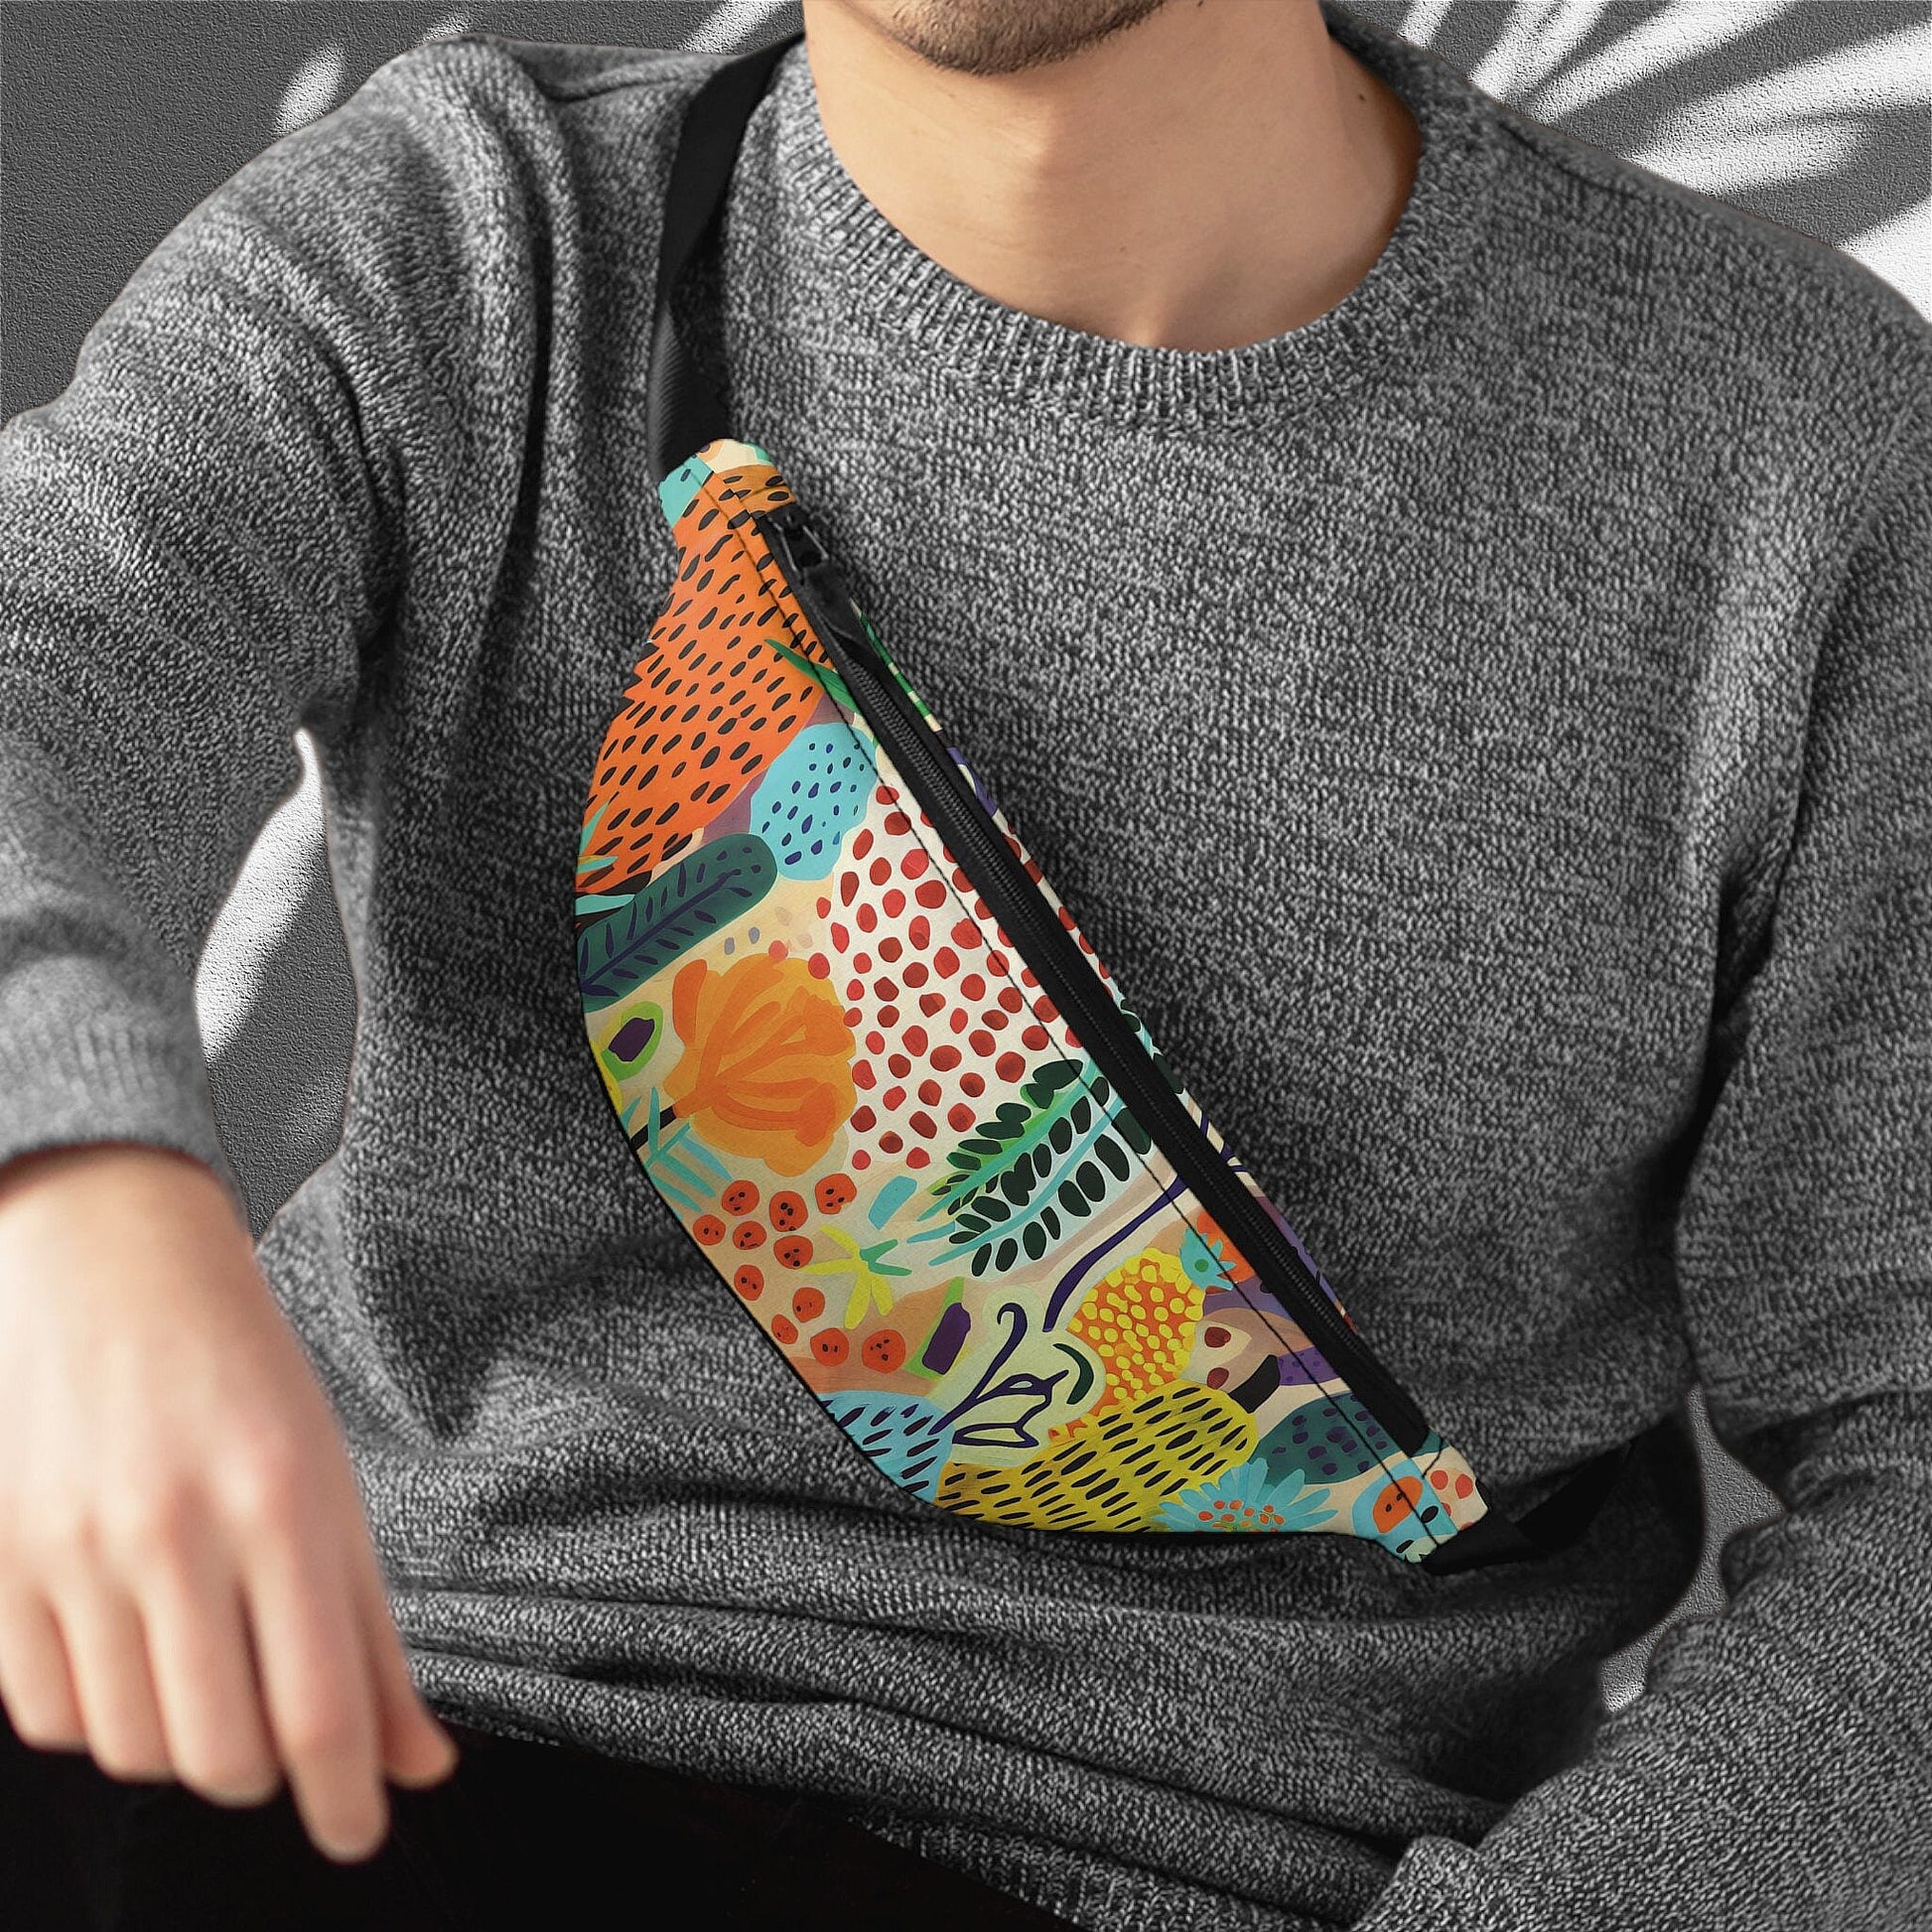 a man wearing a gray sweater and a colorful fanny bag